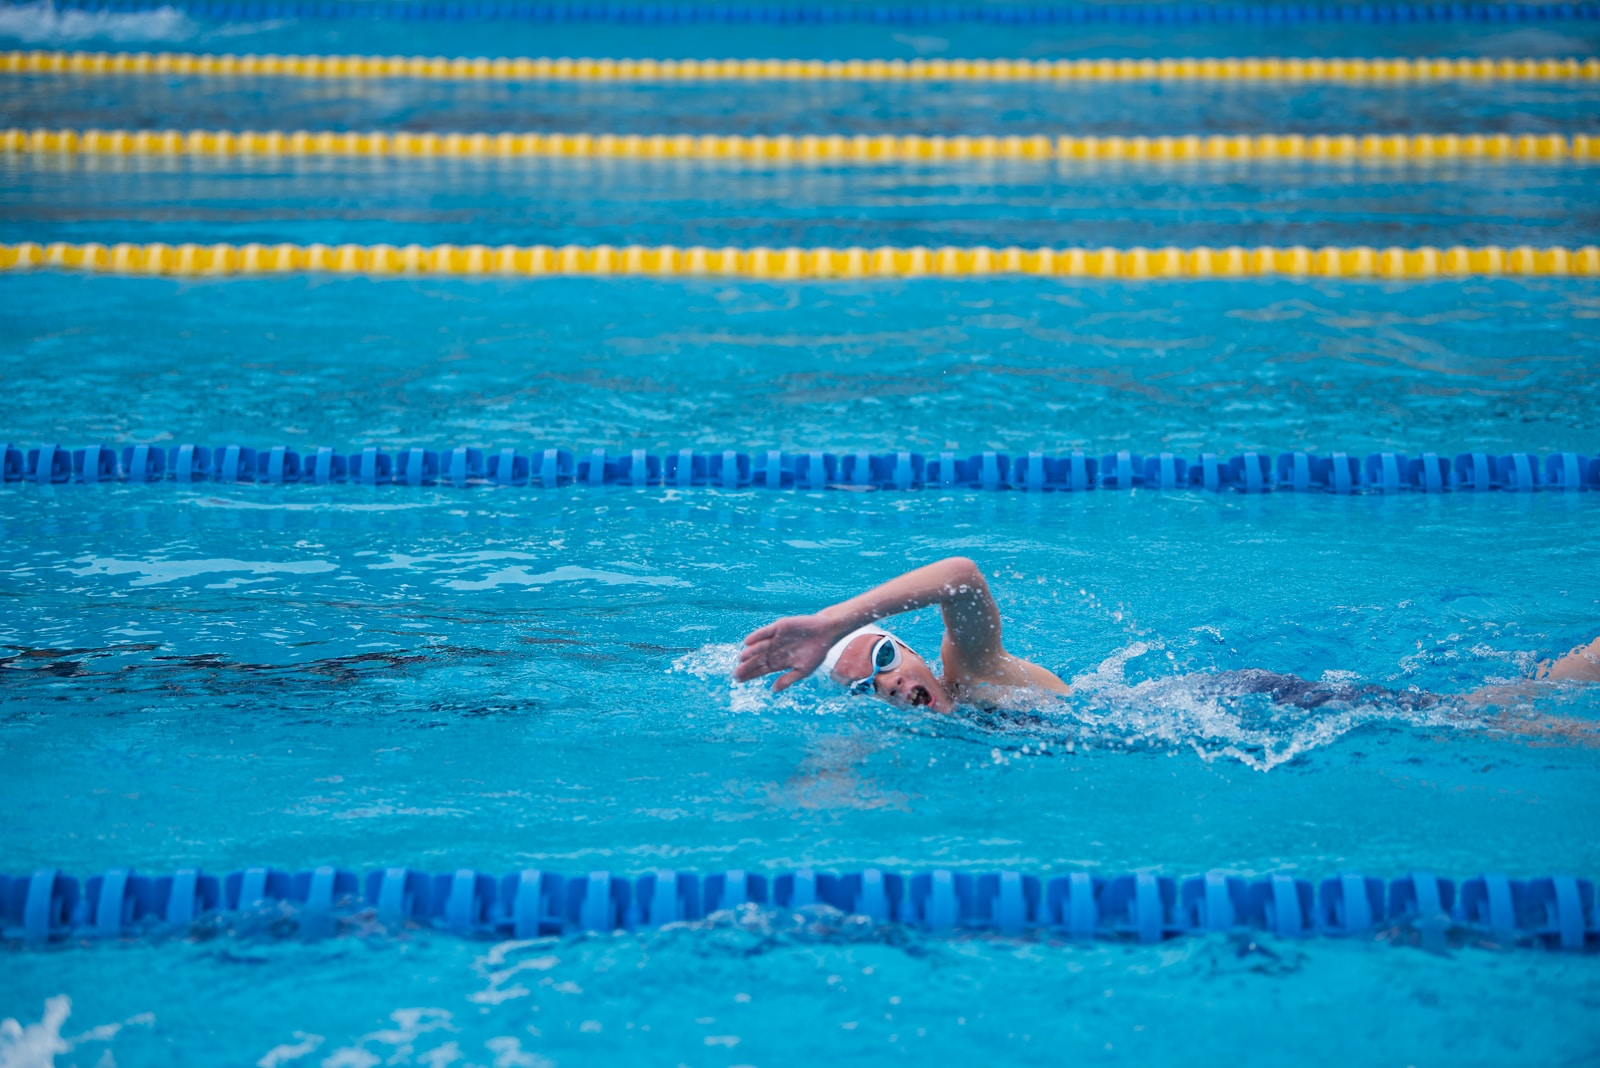 
How To Waterproof A Wound For Swimming: Step By Step Guide